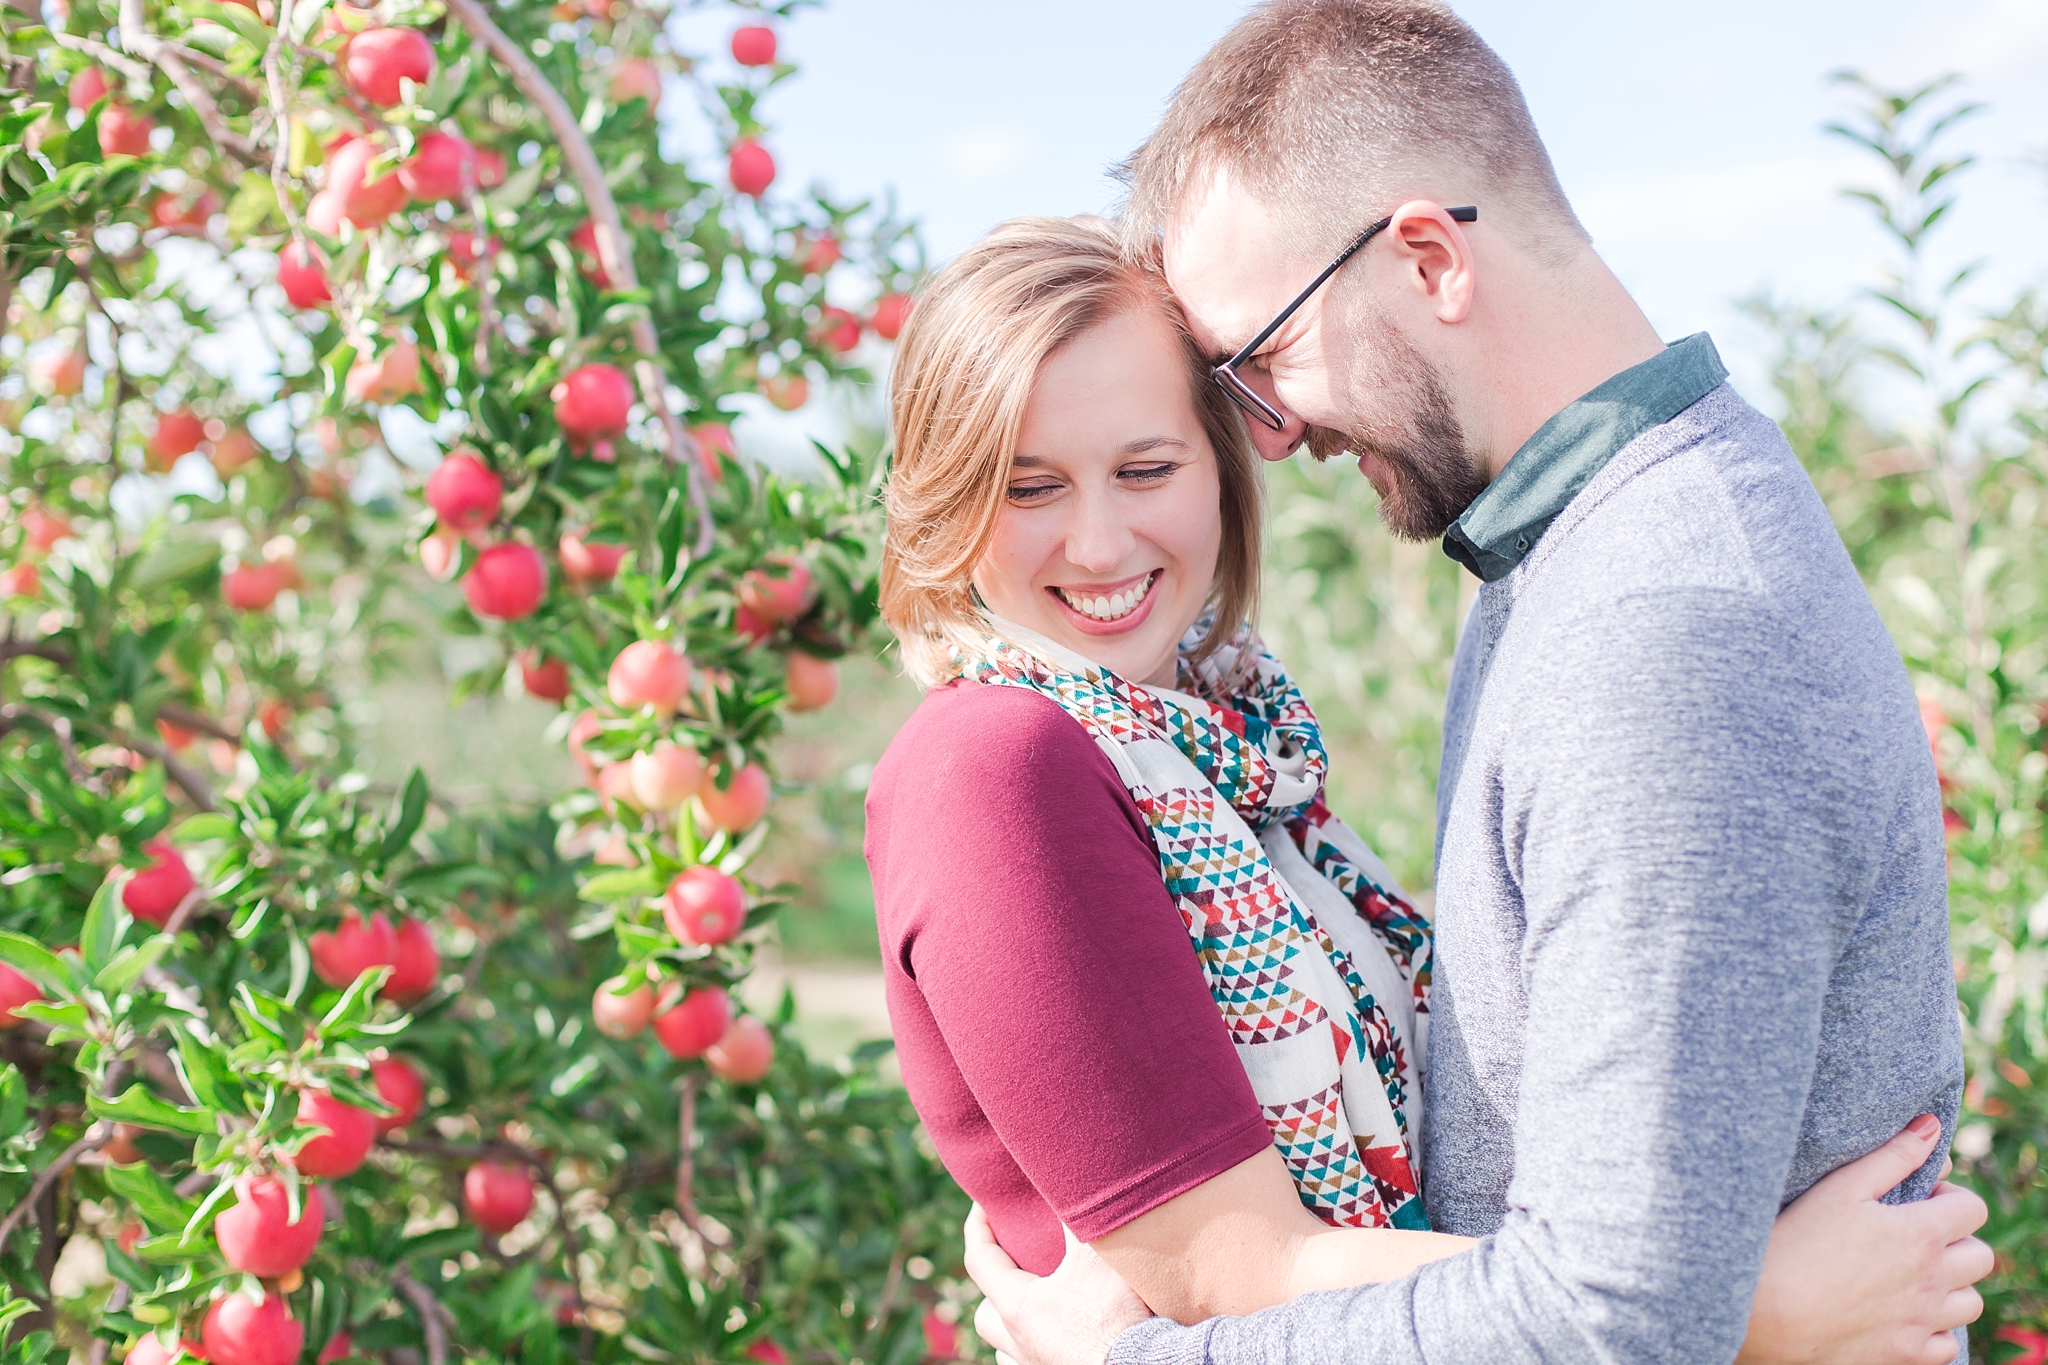 playful-fall-engagement-photos-at-hy's-cider-mill-ochard-in-bruce-township-michigan-by-courtney-carolyn-photography_0014.jpg